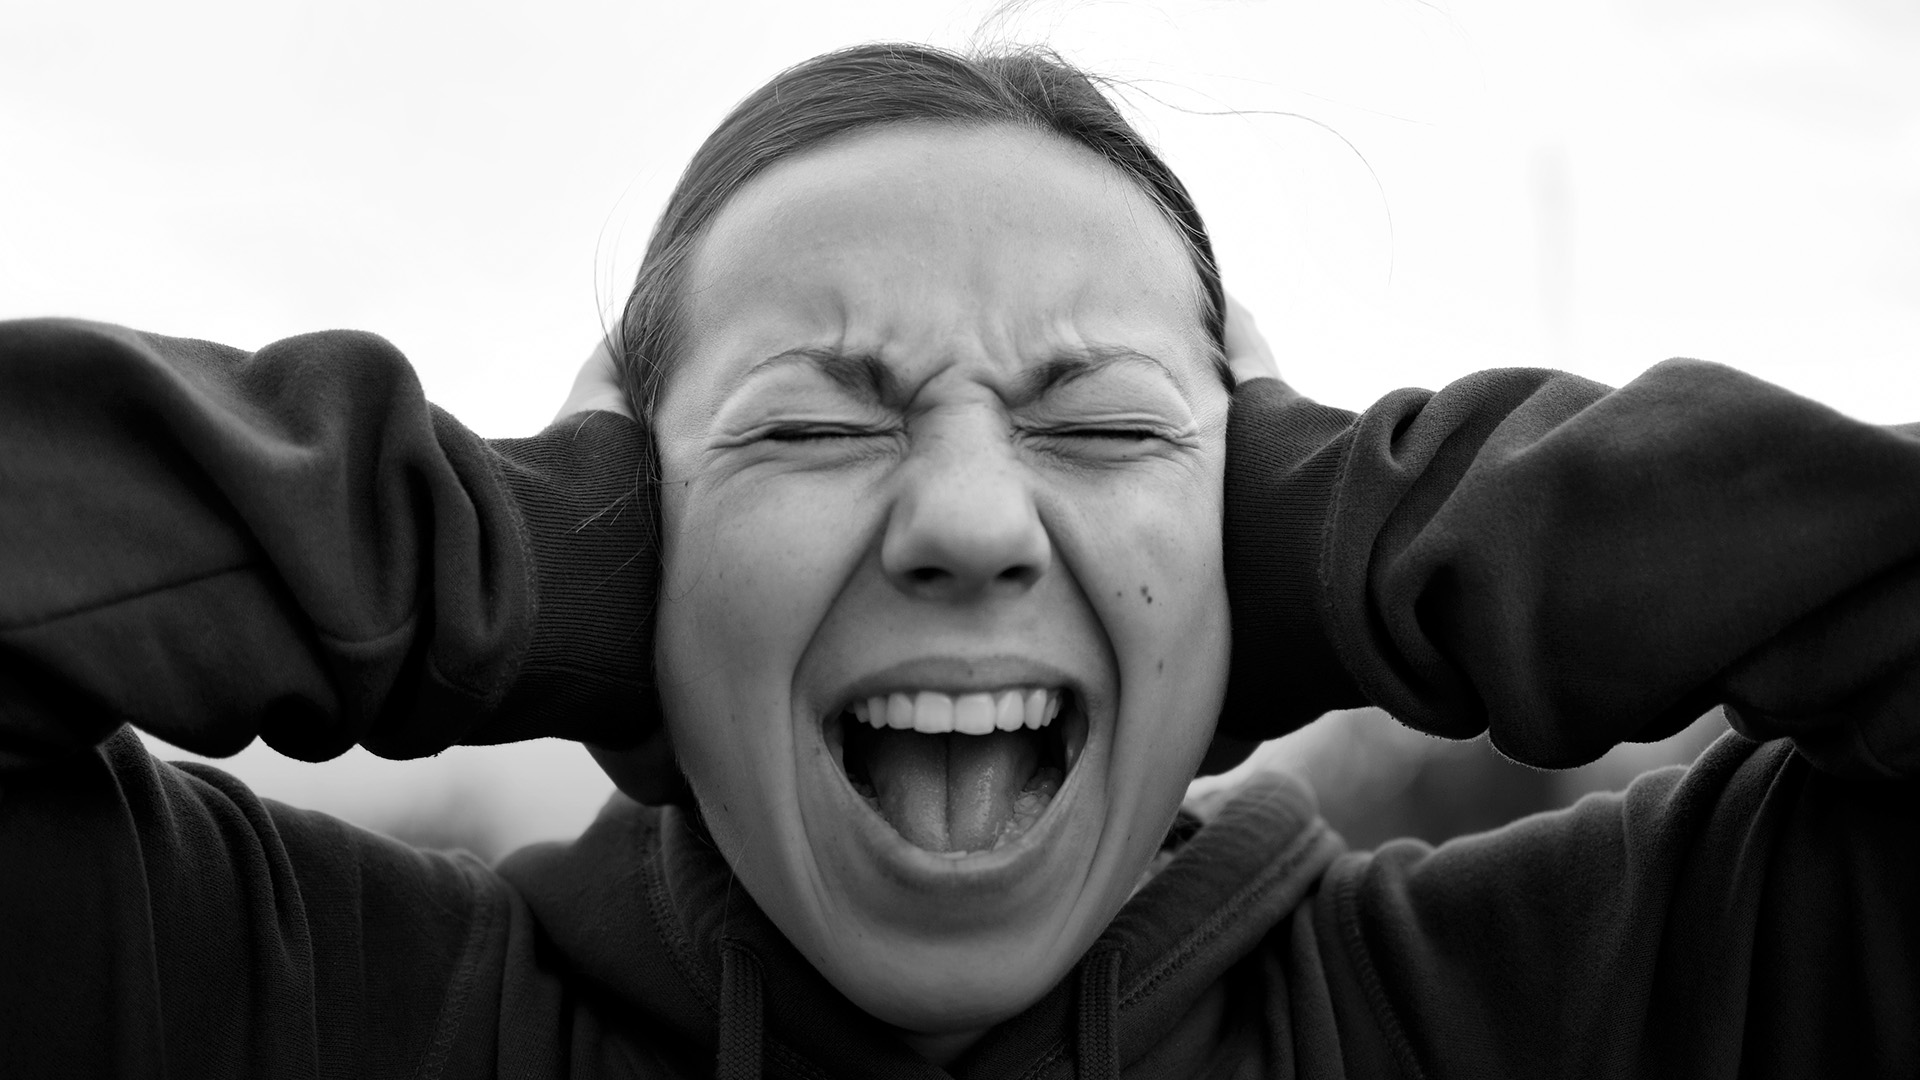 A young woman screams with her mouth open while covering her ears with her hands.